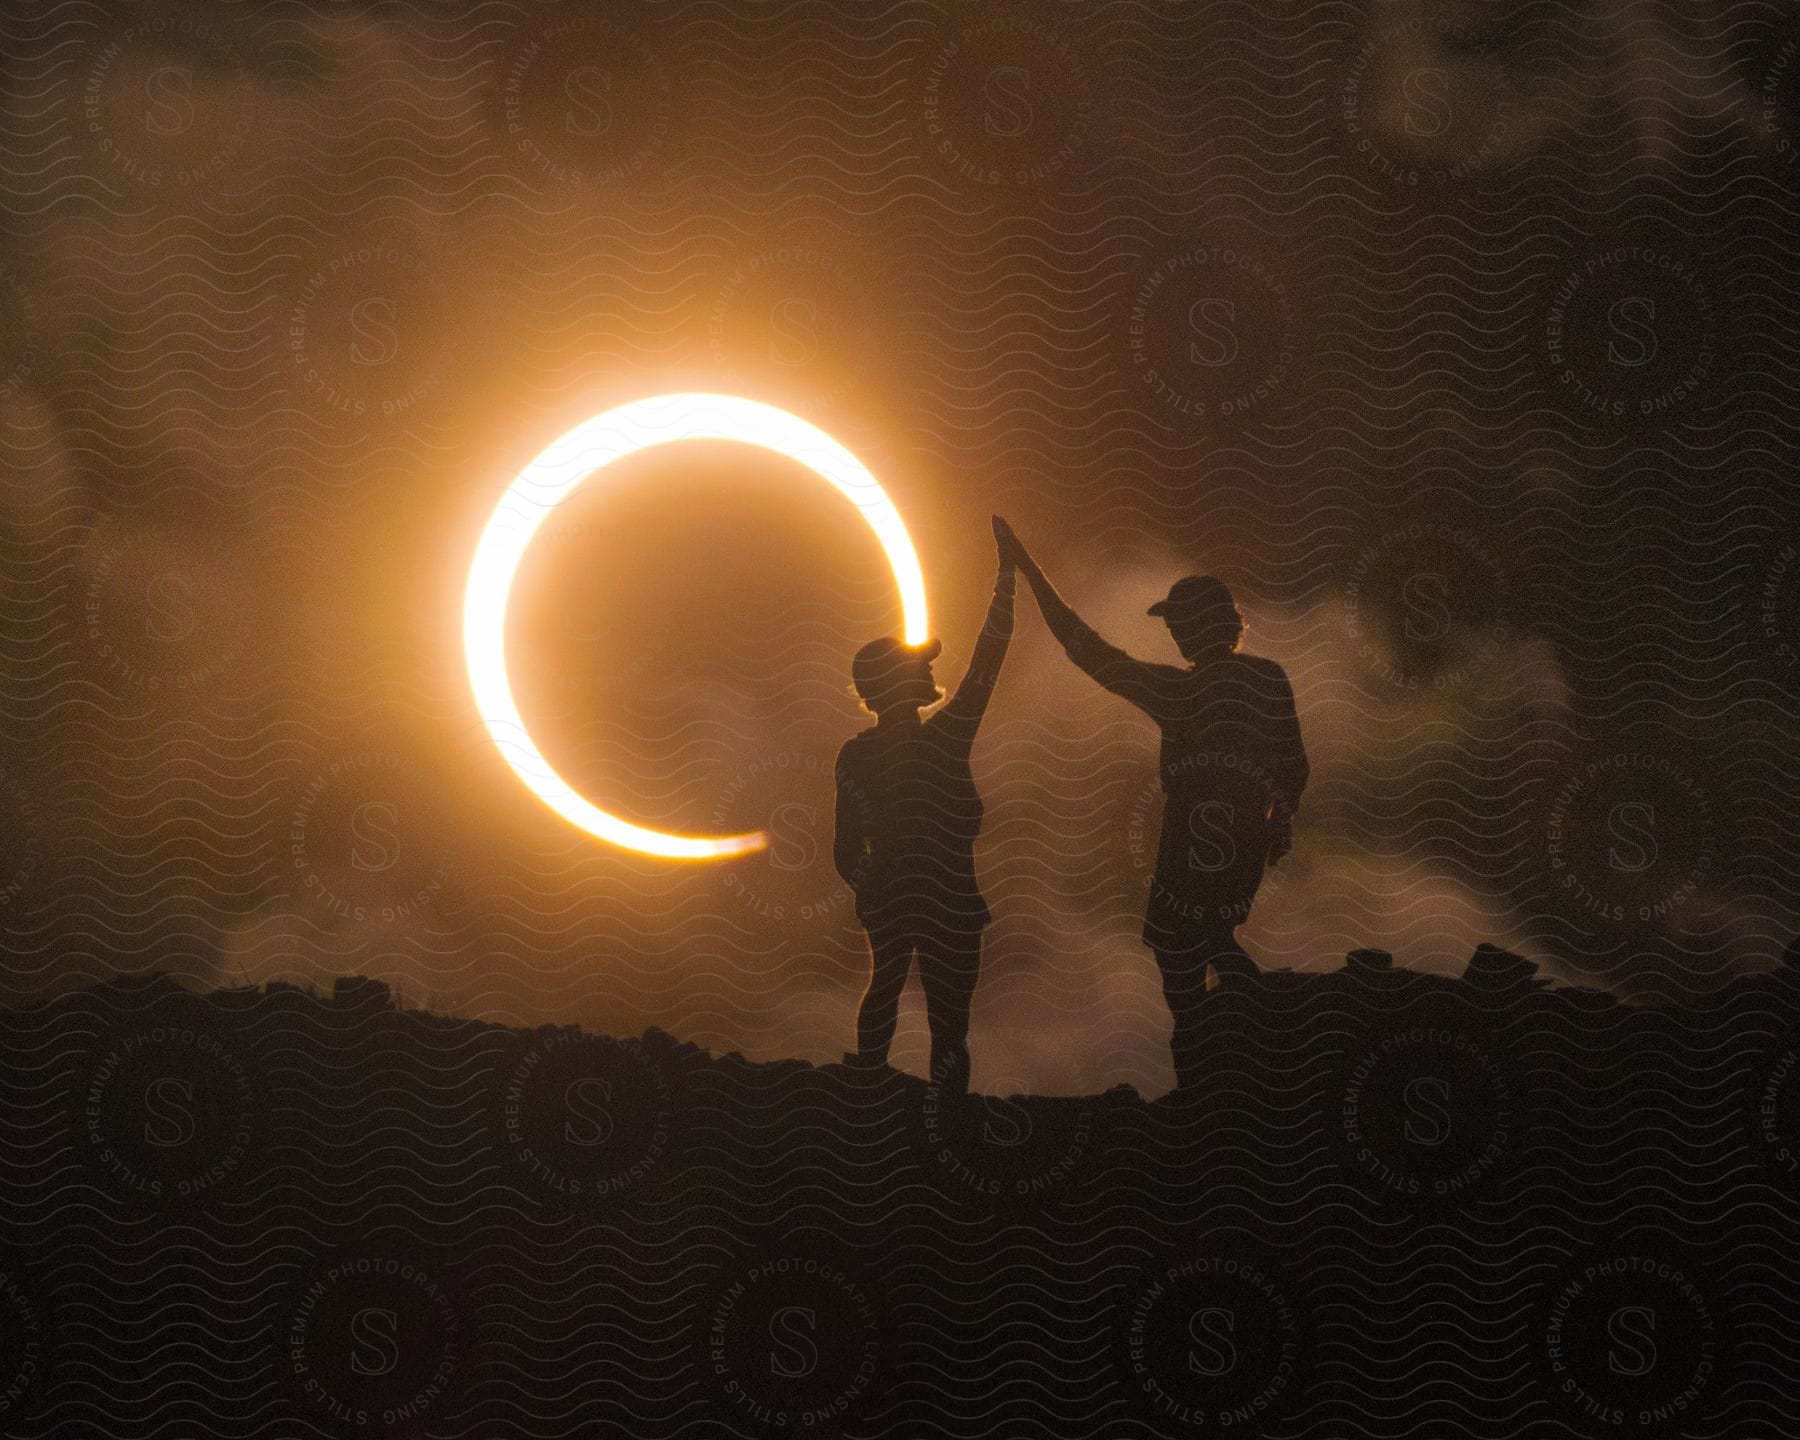 Silhouette of a man and woman touching their palms while on a mountain trail with a lunar eclipse in the background.